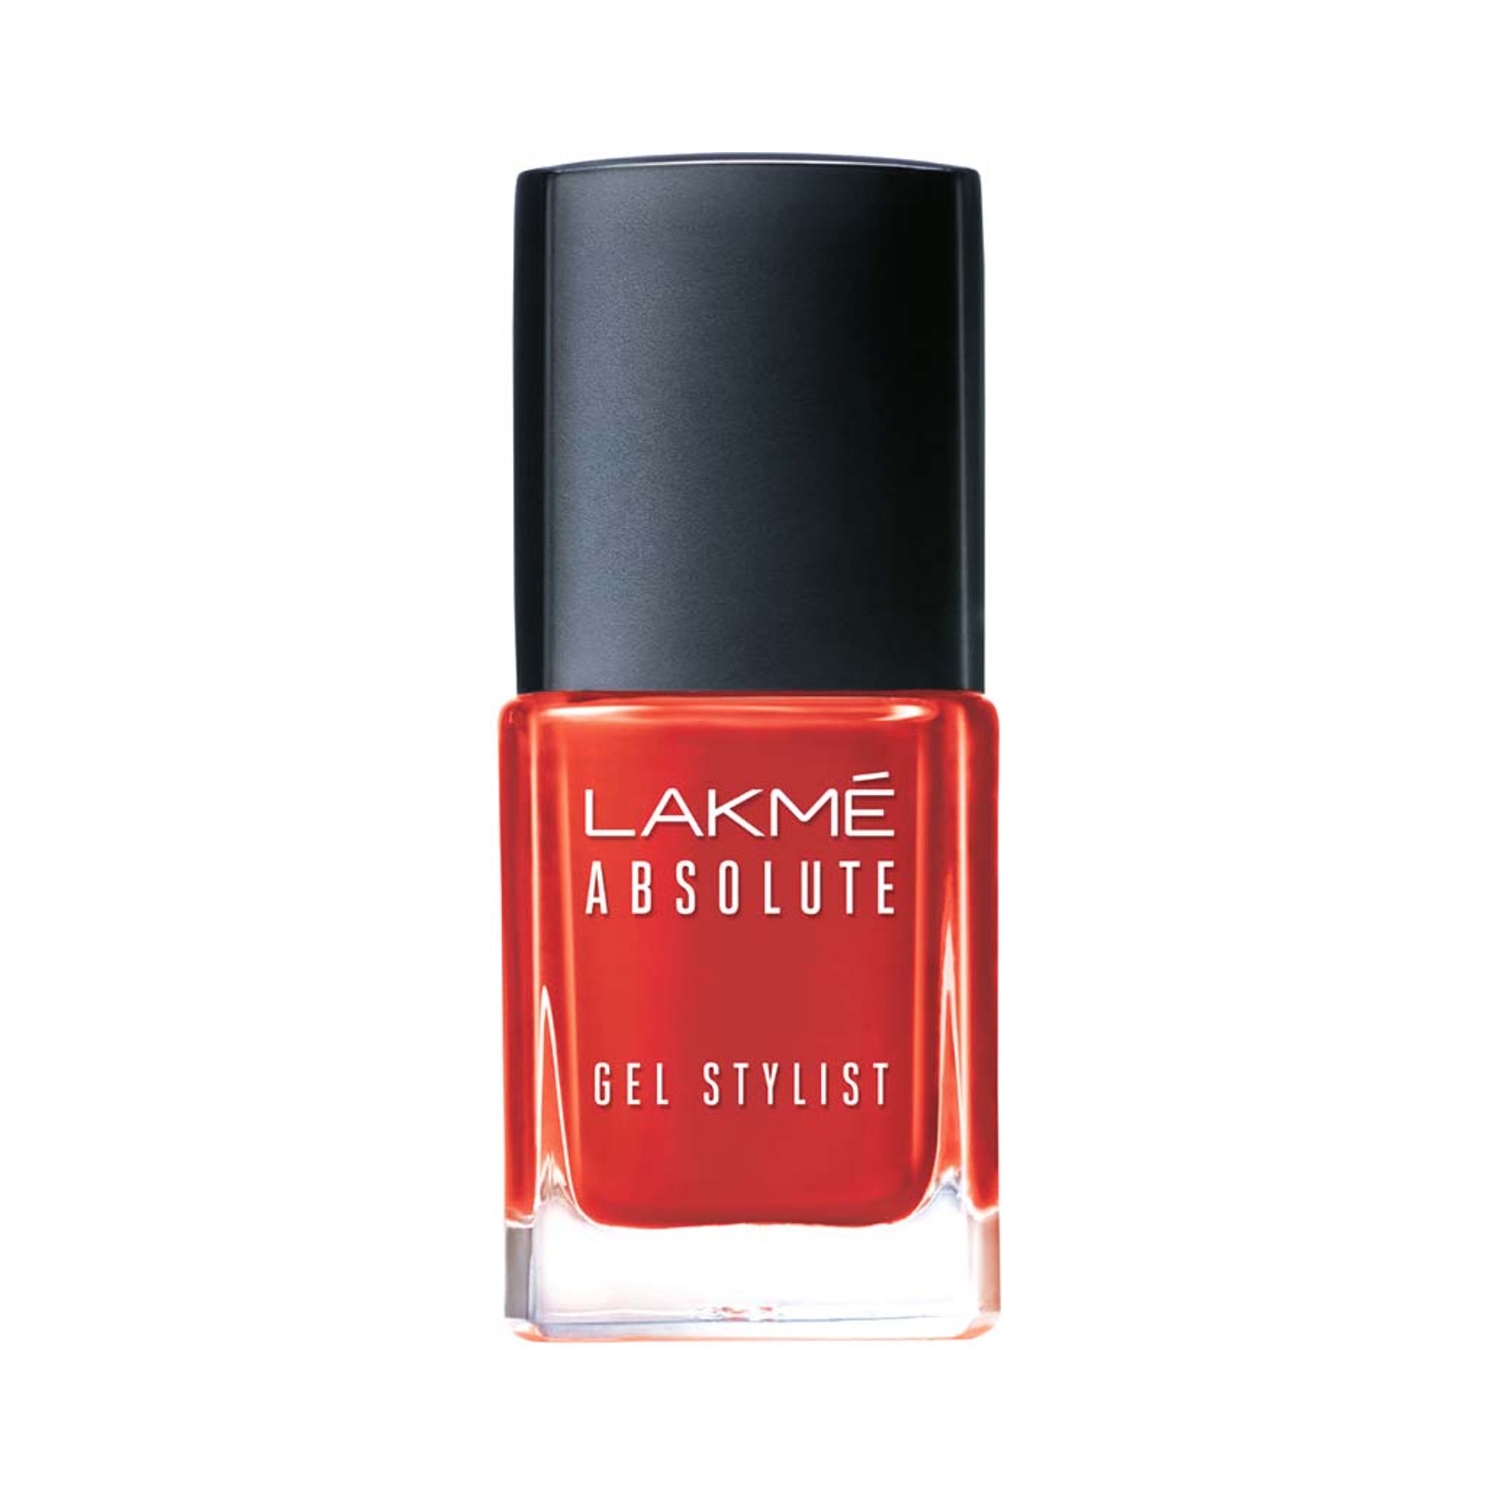 Lakme Absolute Gel Stylist Nail Color - Tomato Tango (12ml)